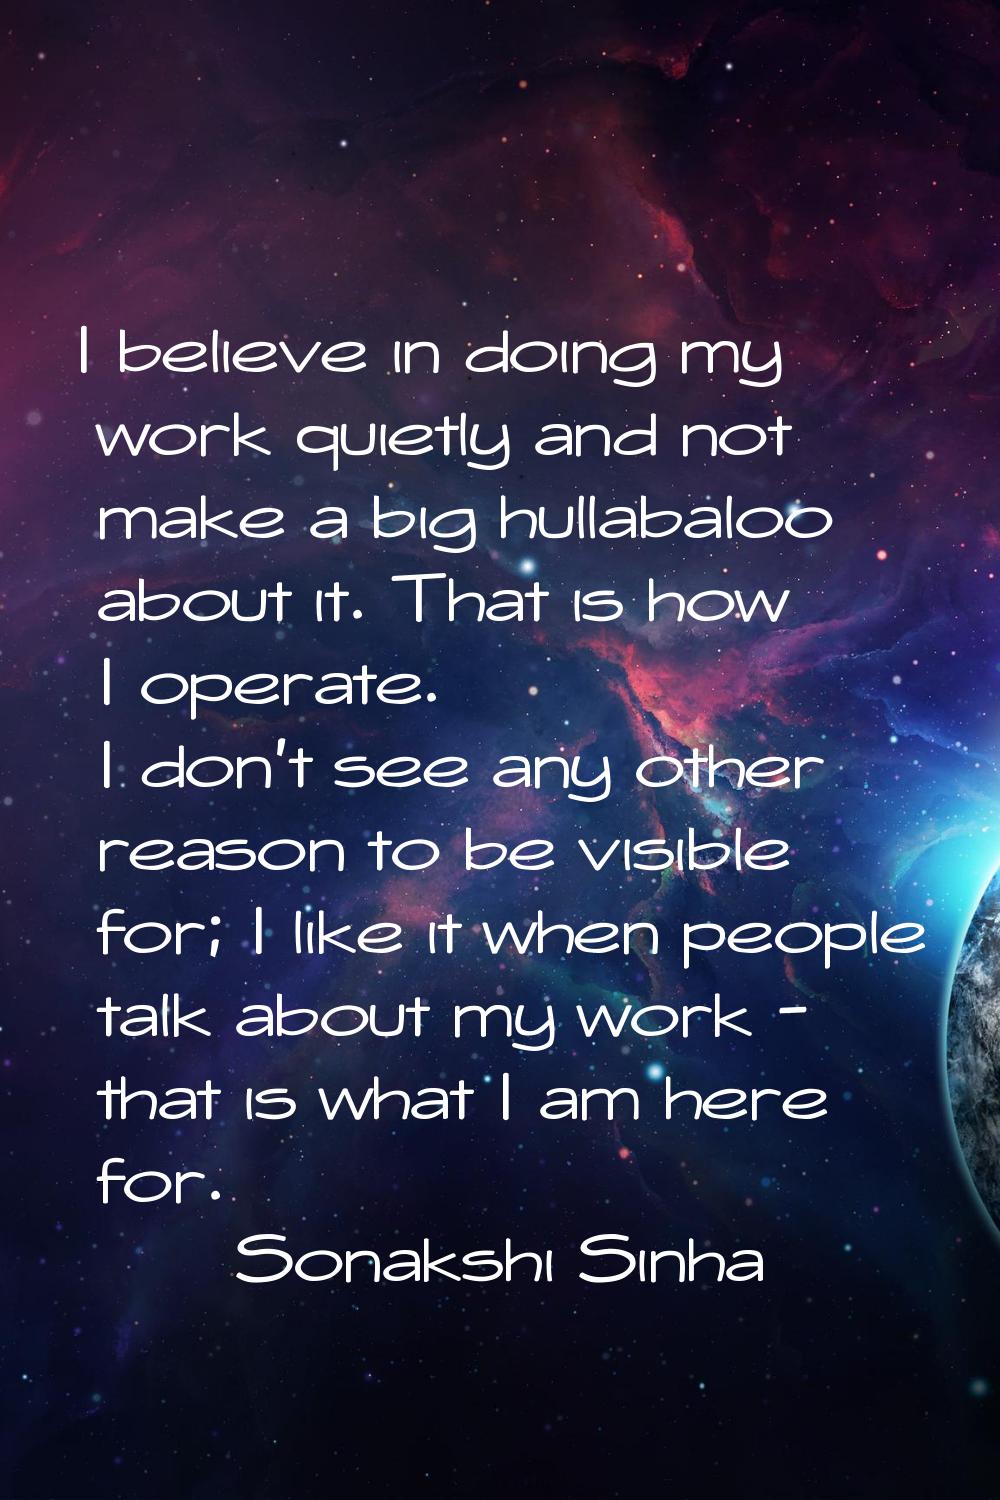 I believe in doing my work quietly and not make a big hullabaloo about it. That is how I operate. I